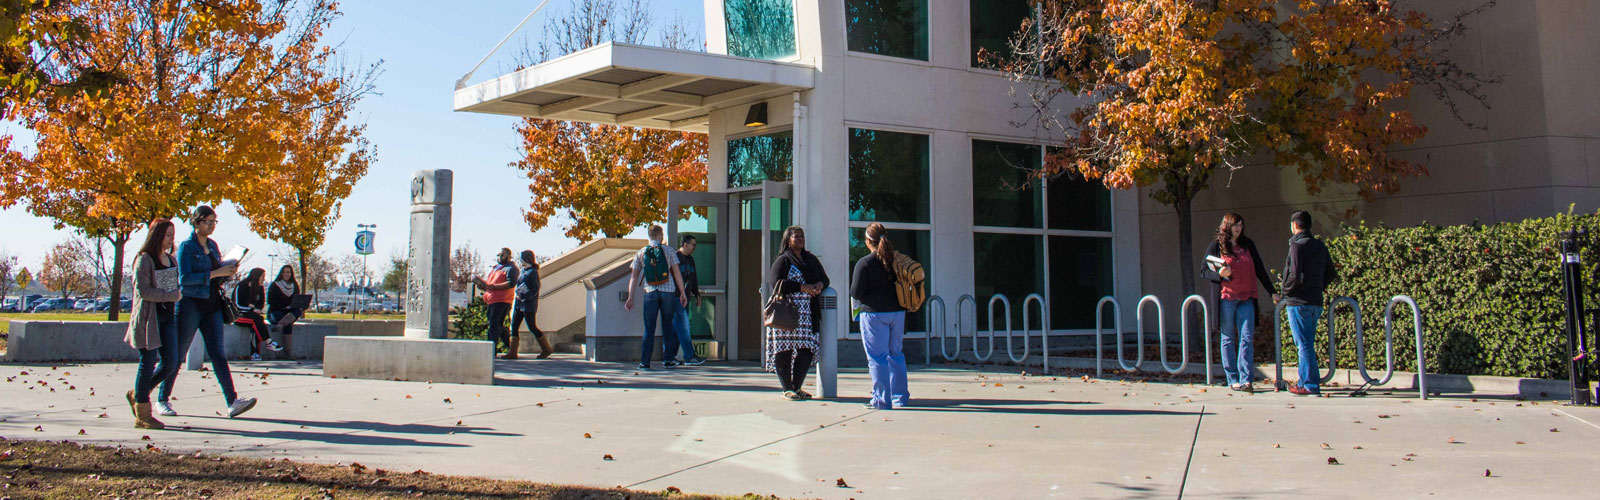 Clovis Campus academic A building with students walking in front